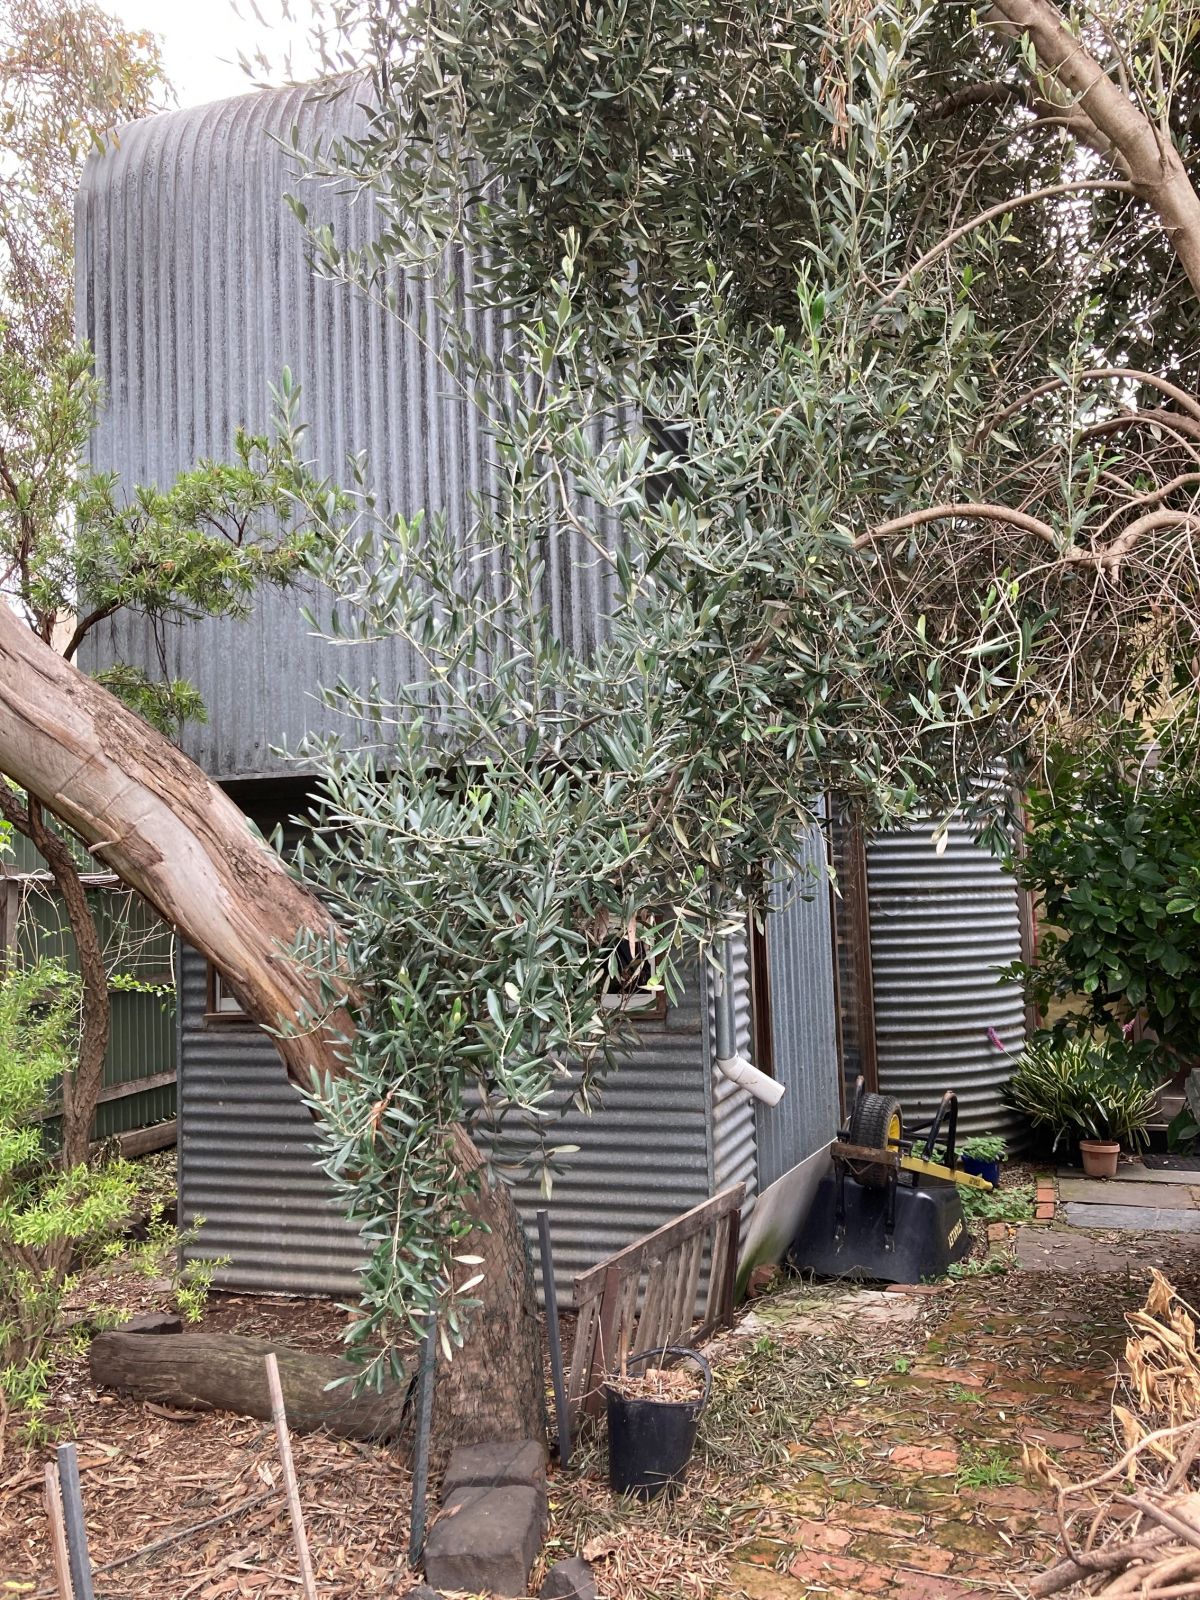 Image of a narrow house made with grey corrugated iron. The house is surrounded by trees and the view is partially blocked by an olive tree.